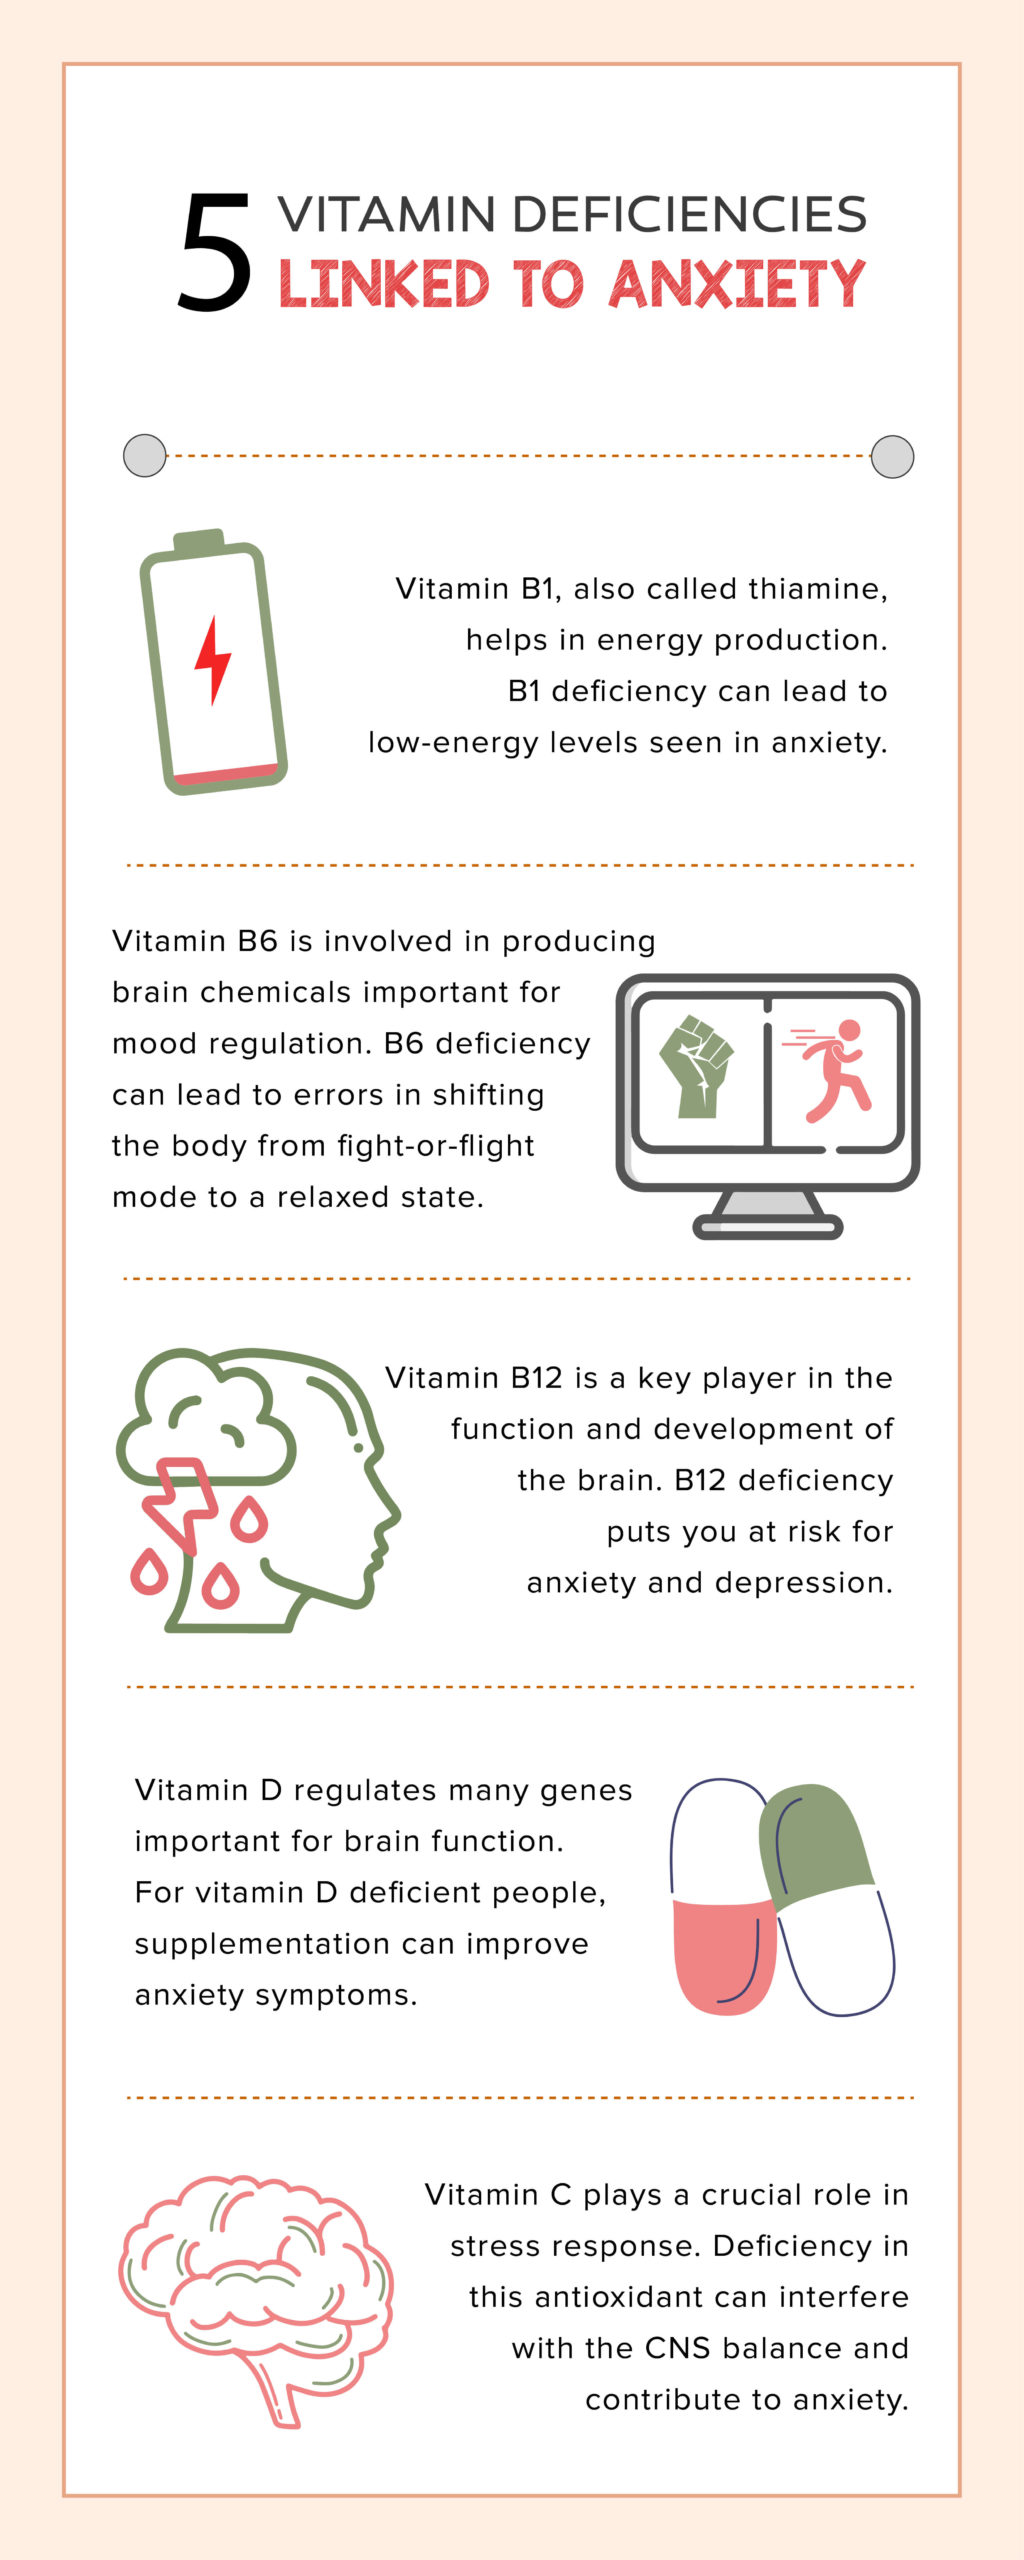 Infographic showing 5 effects of vitamin deficiency on anxiety